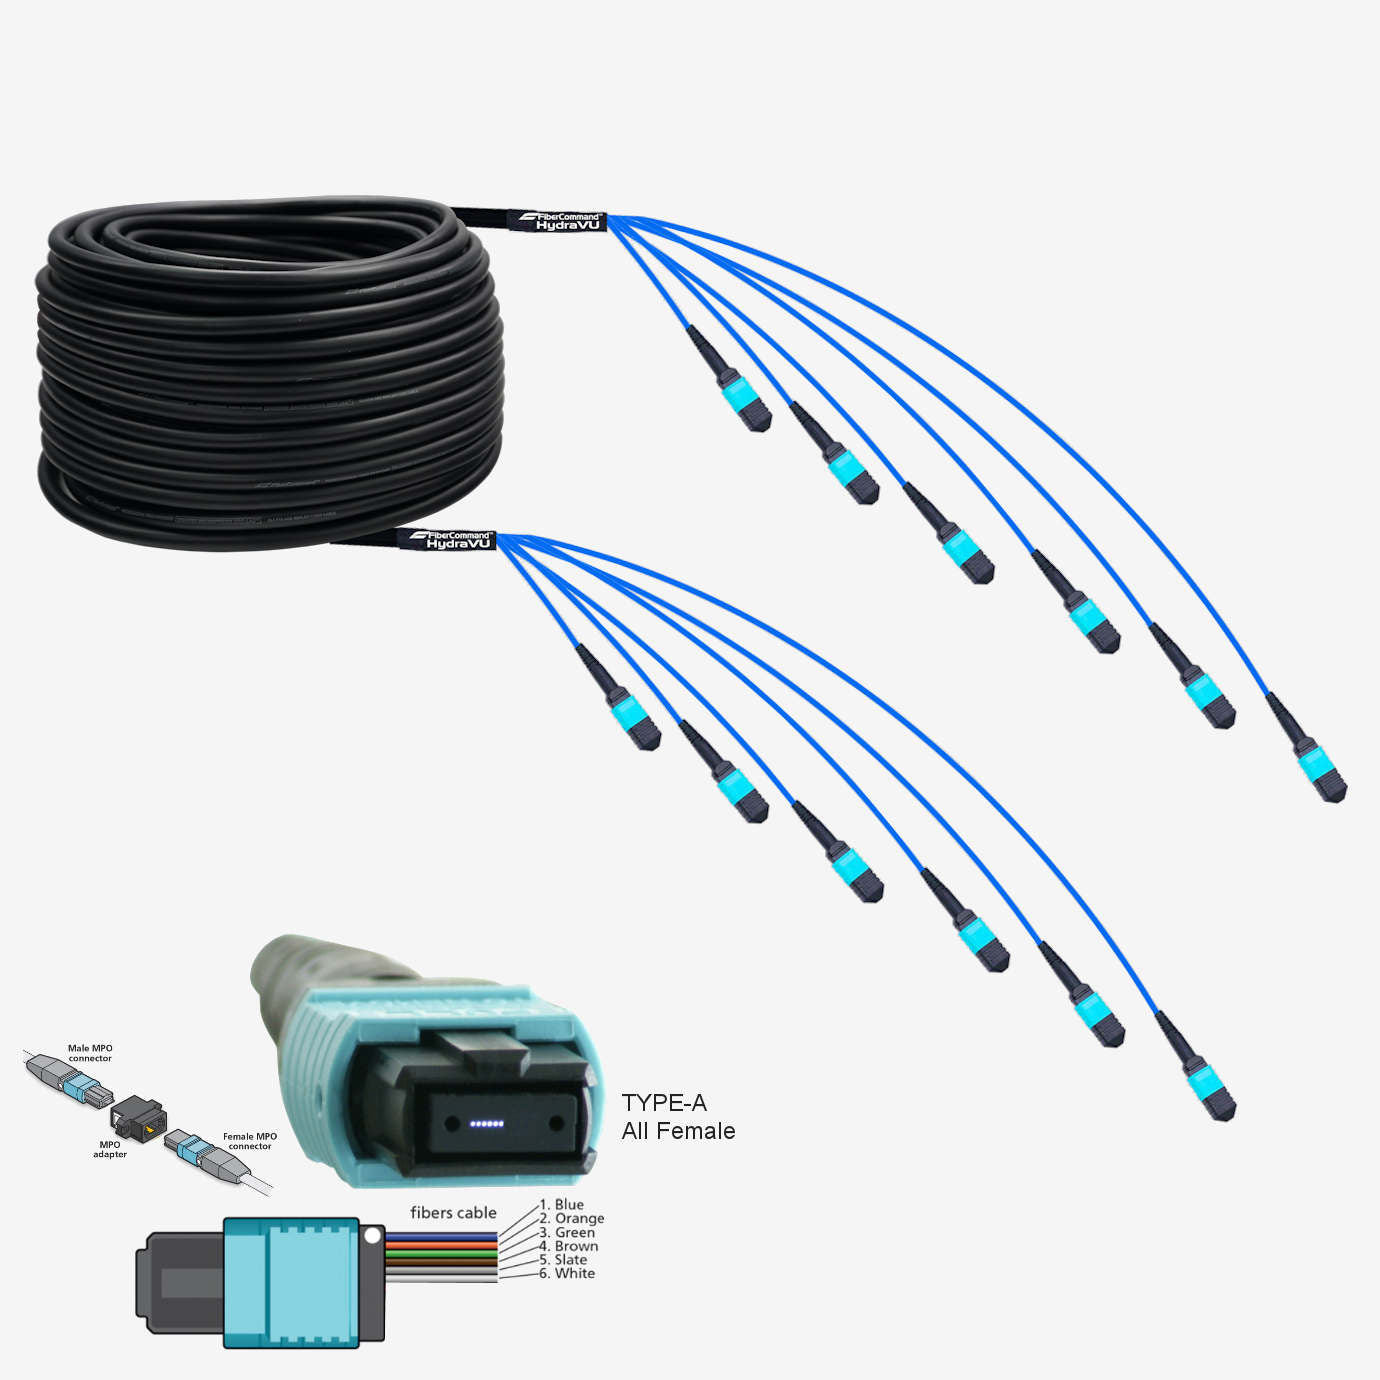 Hydraview® 36 with 6 x HDMI 2.1 termination |  HDMI 2.1 48Gbps | 4K120Hz | 8K60Hz | Fiber Optic Bundle Cable 36 Strands Pre-Terminated